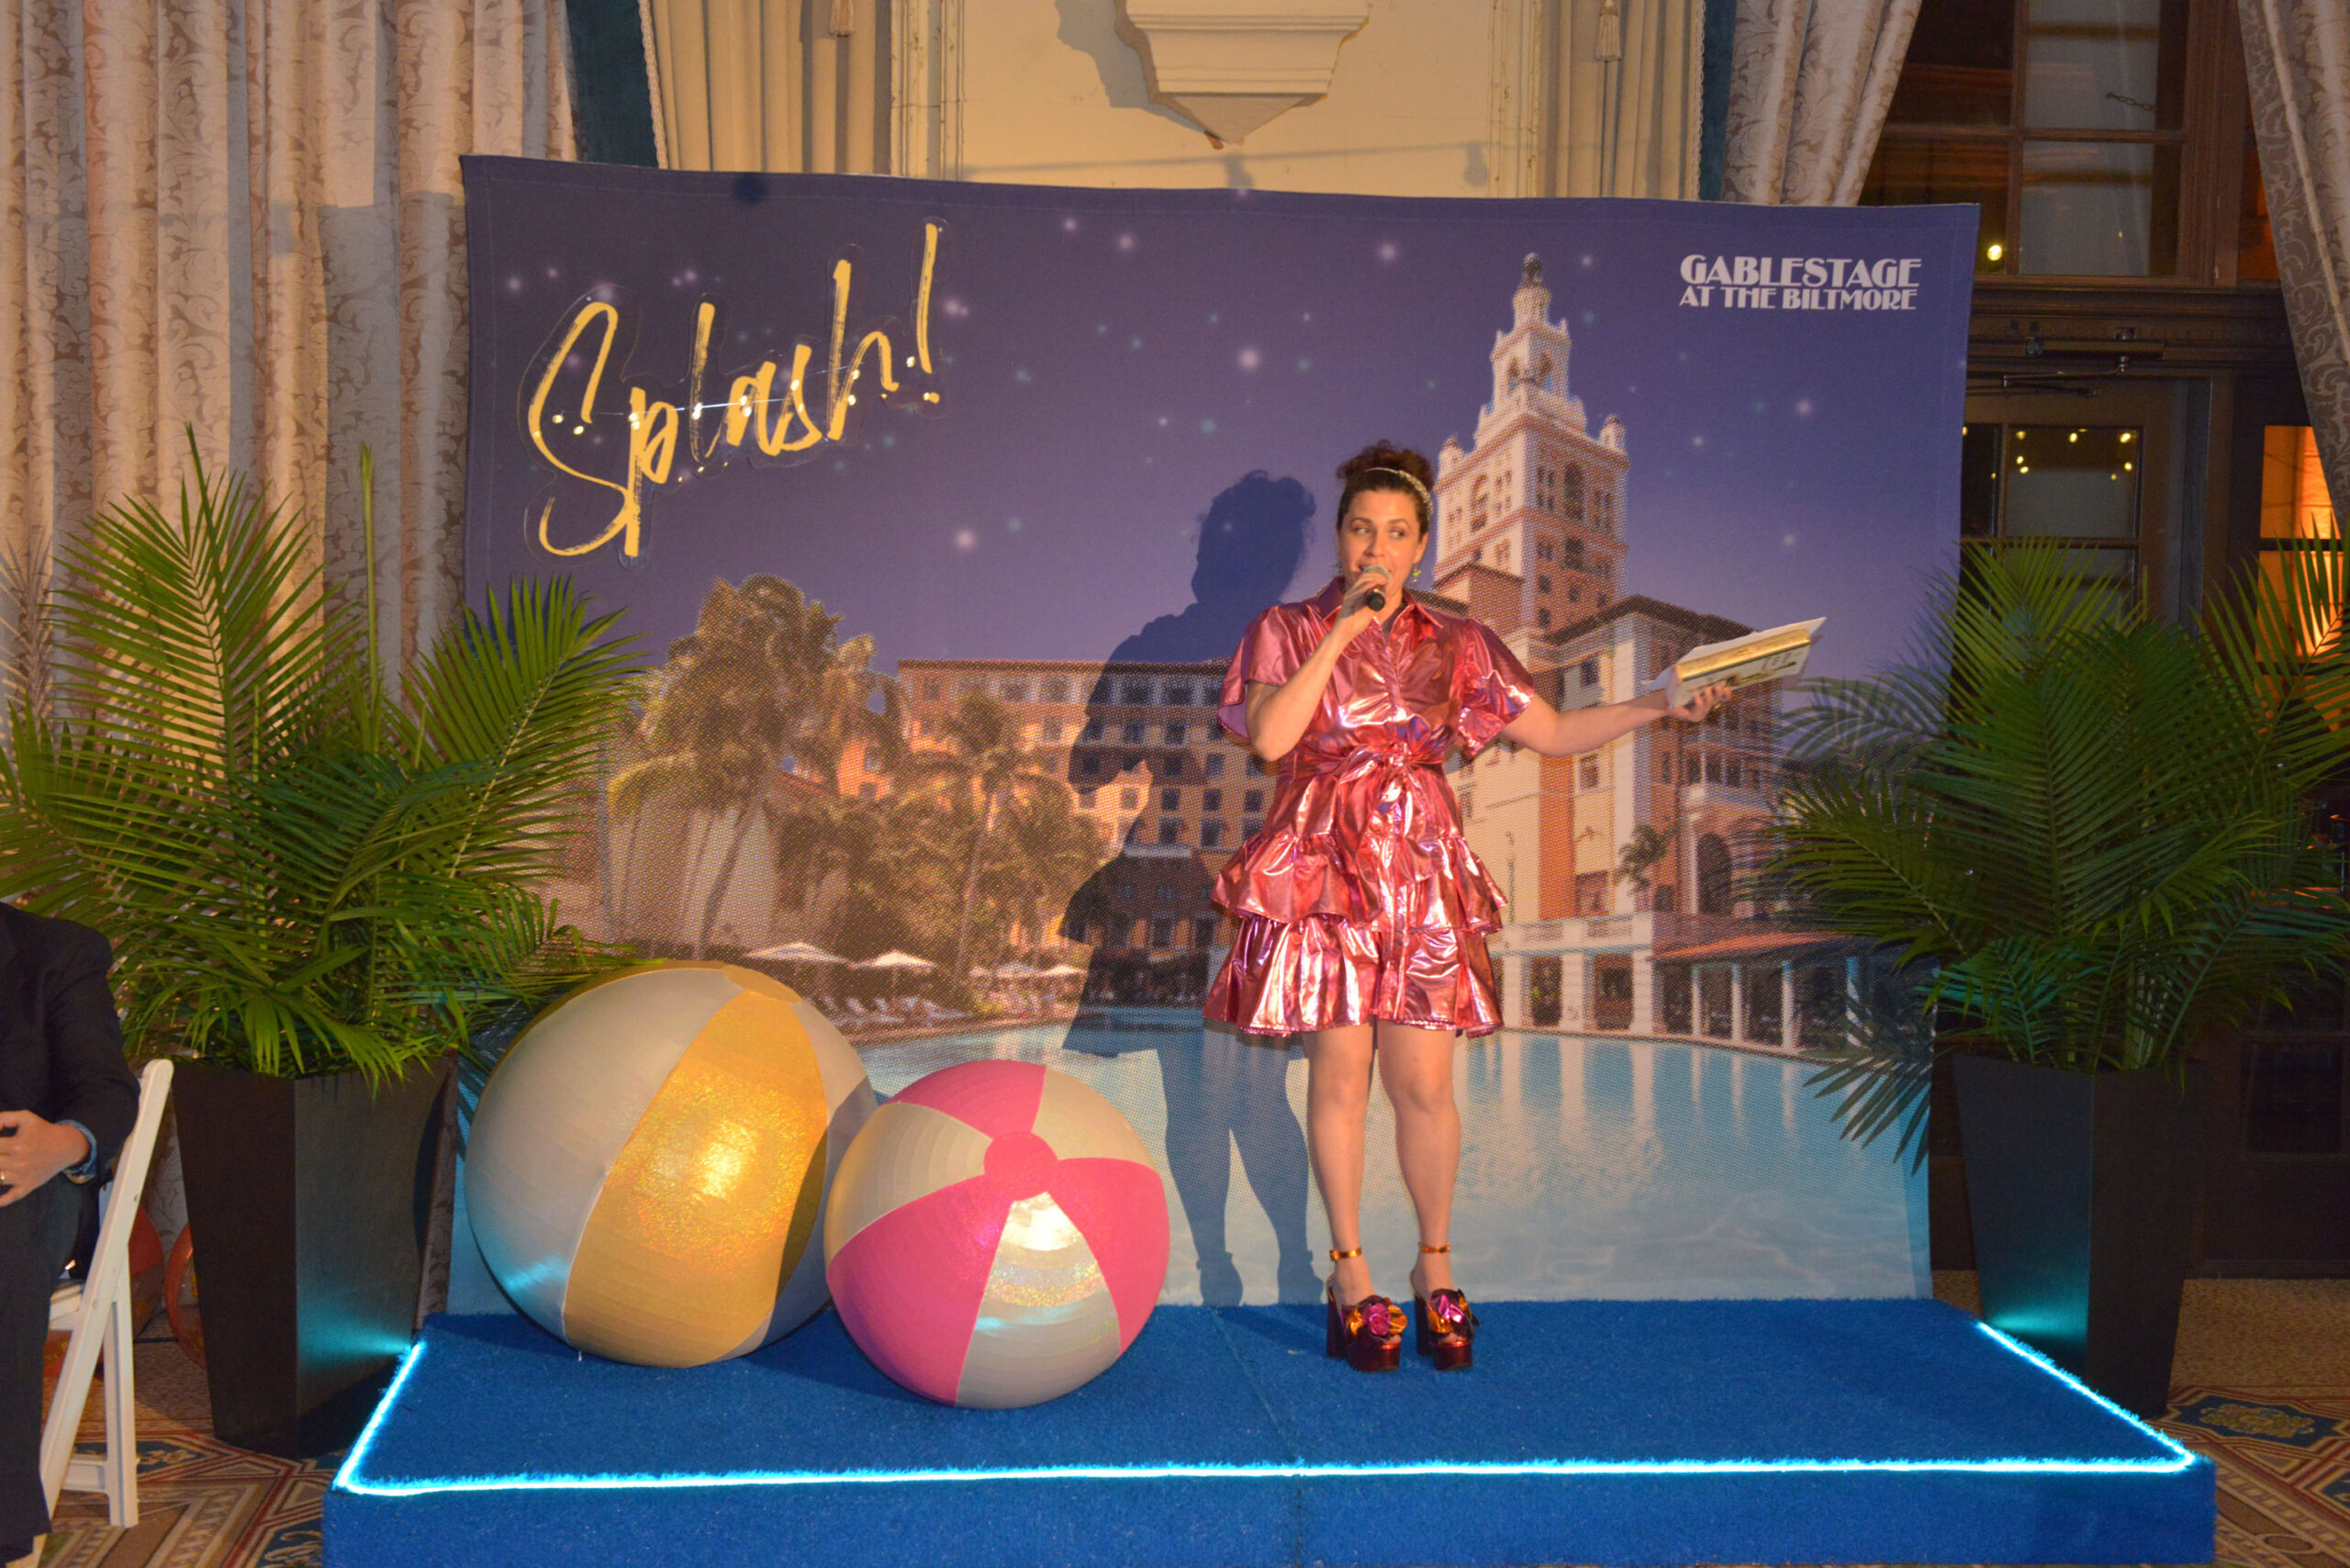 GableStage's new Producing Artistic Director Bari Newport welcomes guests to the Splash! reception (photo credit: World Red Eye, @worldredeye)